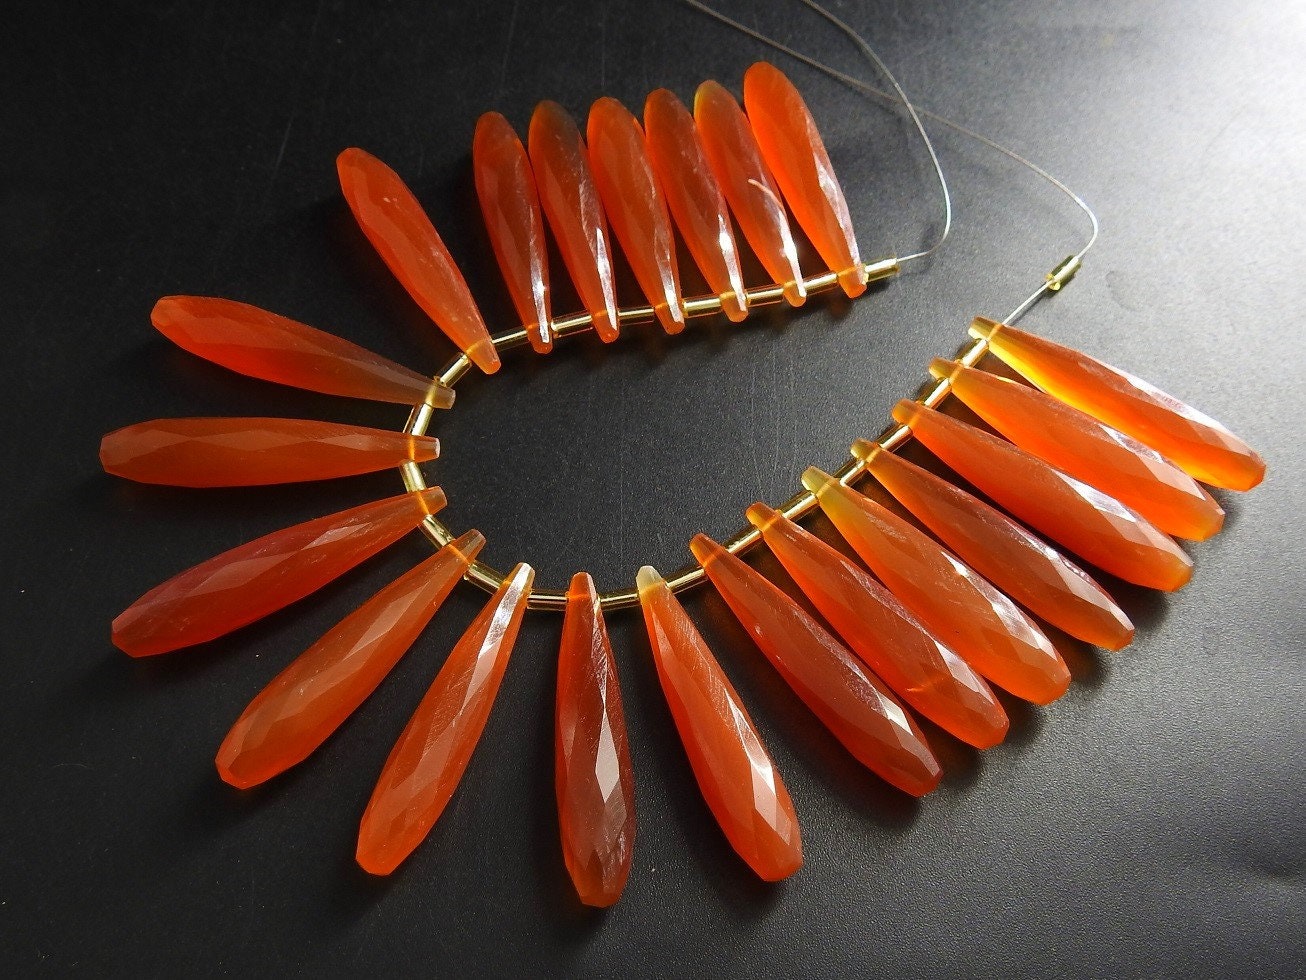 35MM Long Pair,Fanta Orange Chalcedony Faceted Elongated Drops,Teardrop,Loose Stone,Earrings,For Making Jewelry,Wholesaler,Supplies (pme)CY1 | Save 33% - Rajasthan Living 16